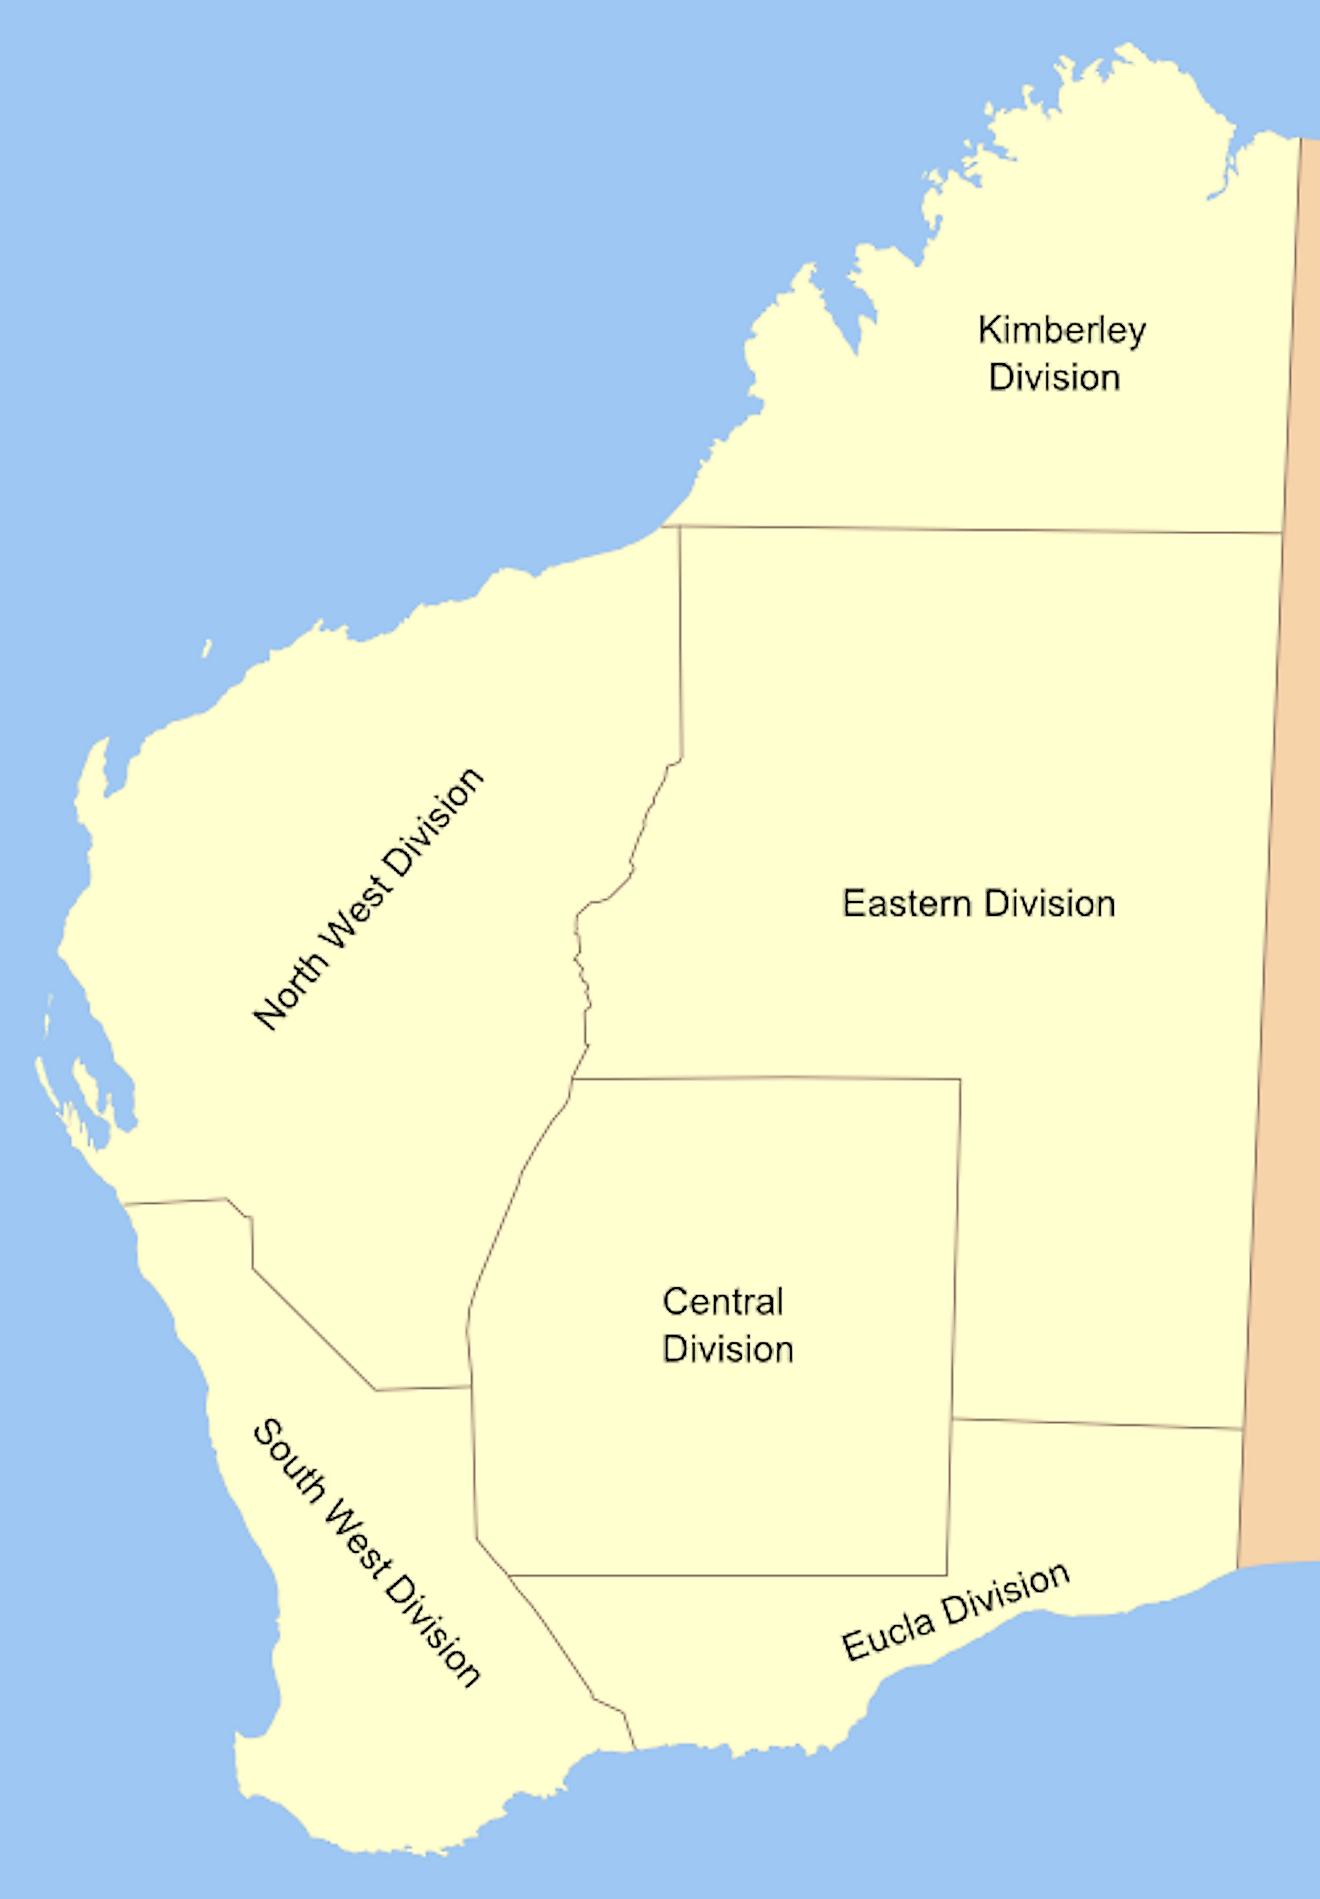 Administrative Map of Western Australia showing its various land divisions. Image credit: Wikimedia.org